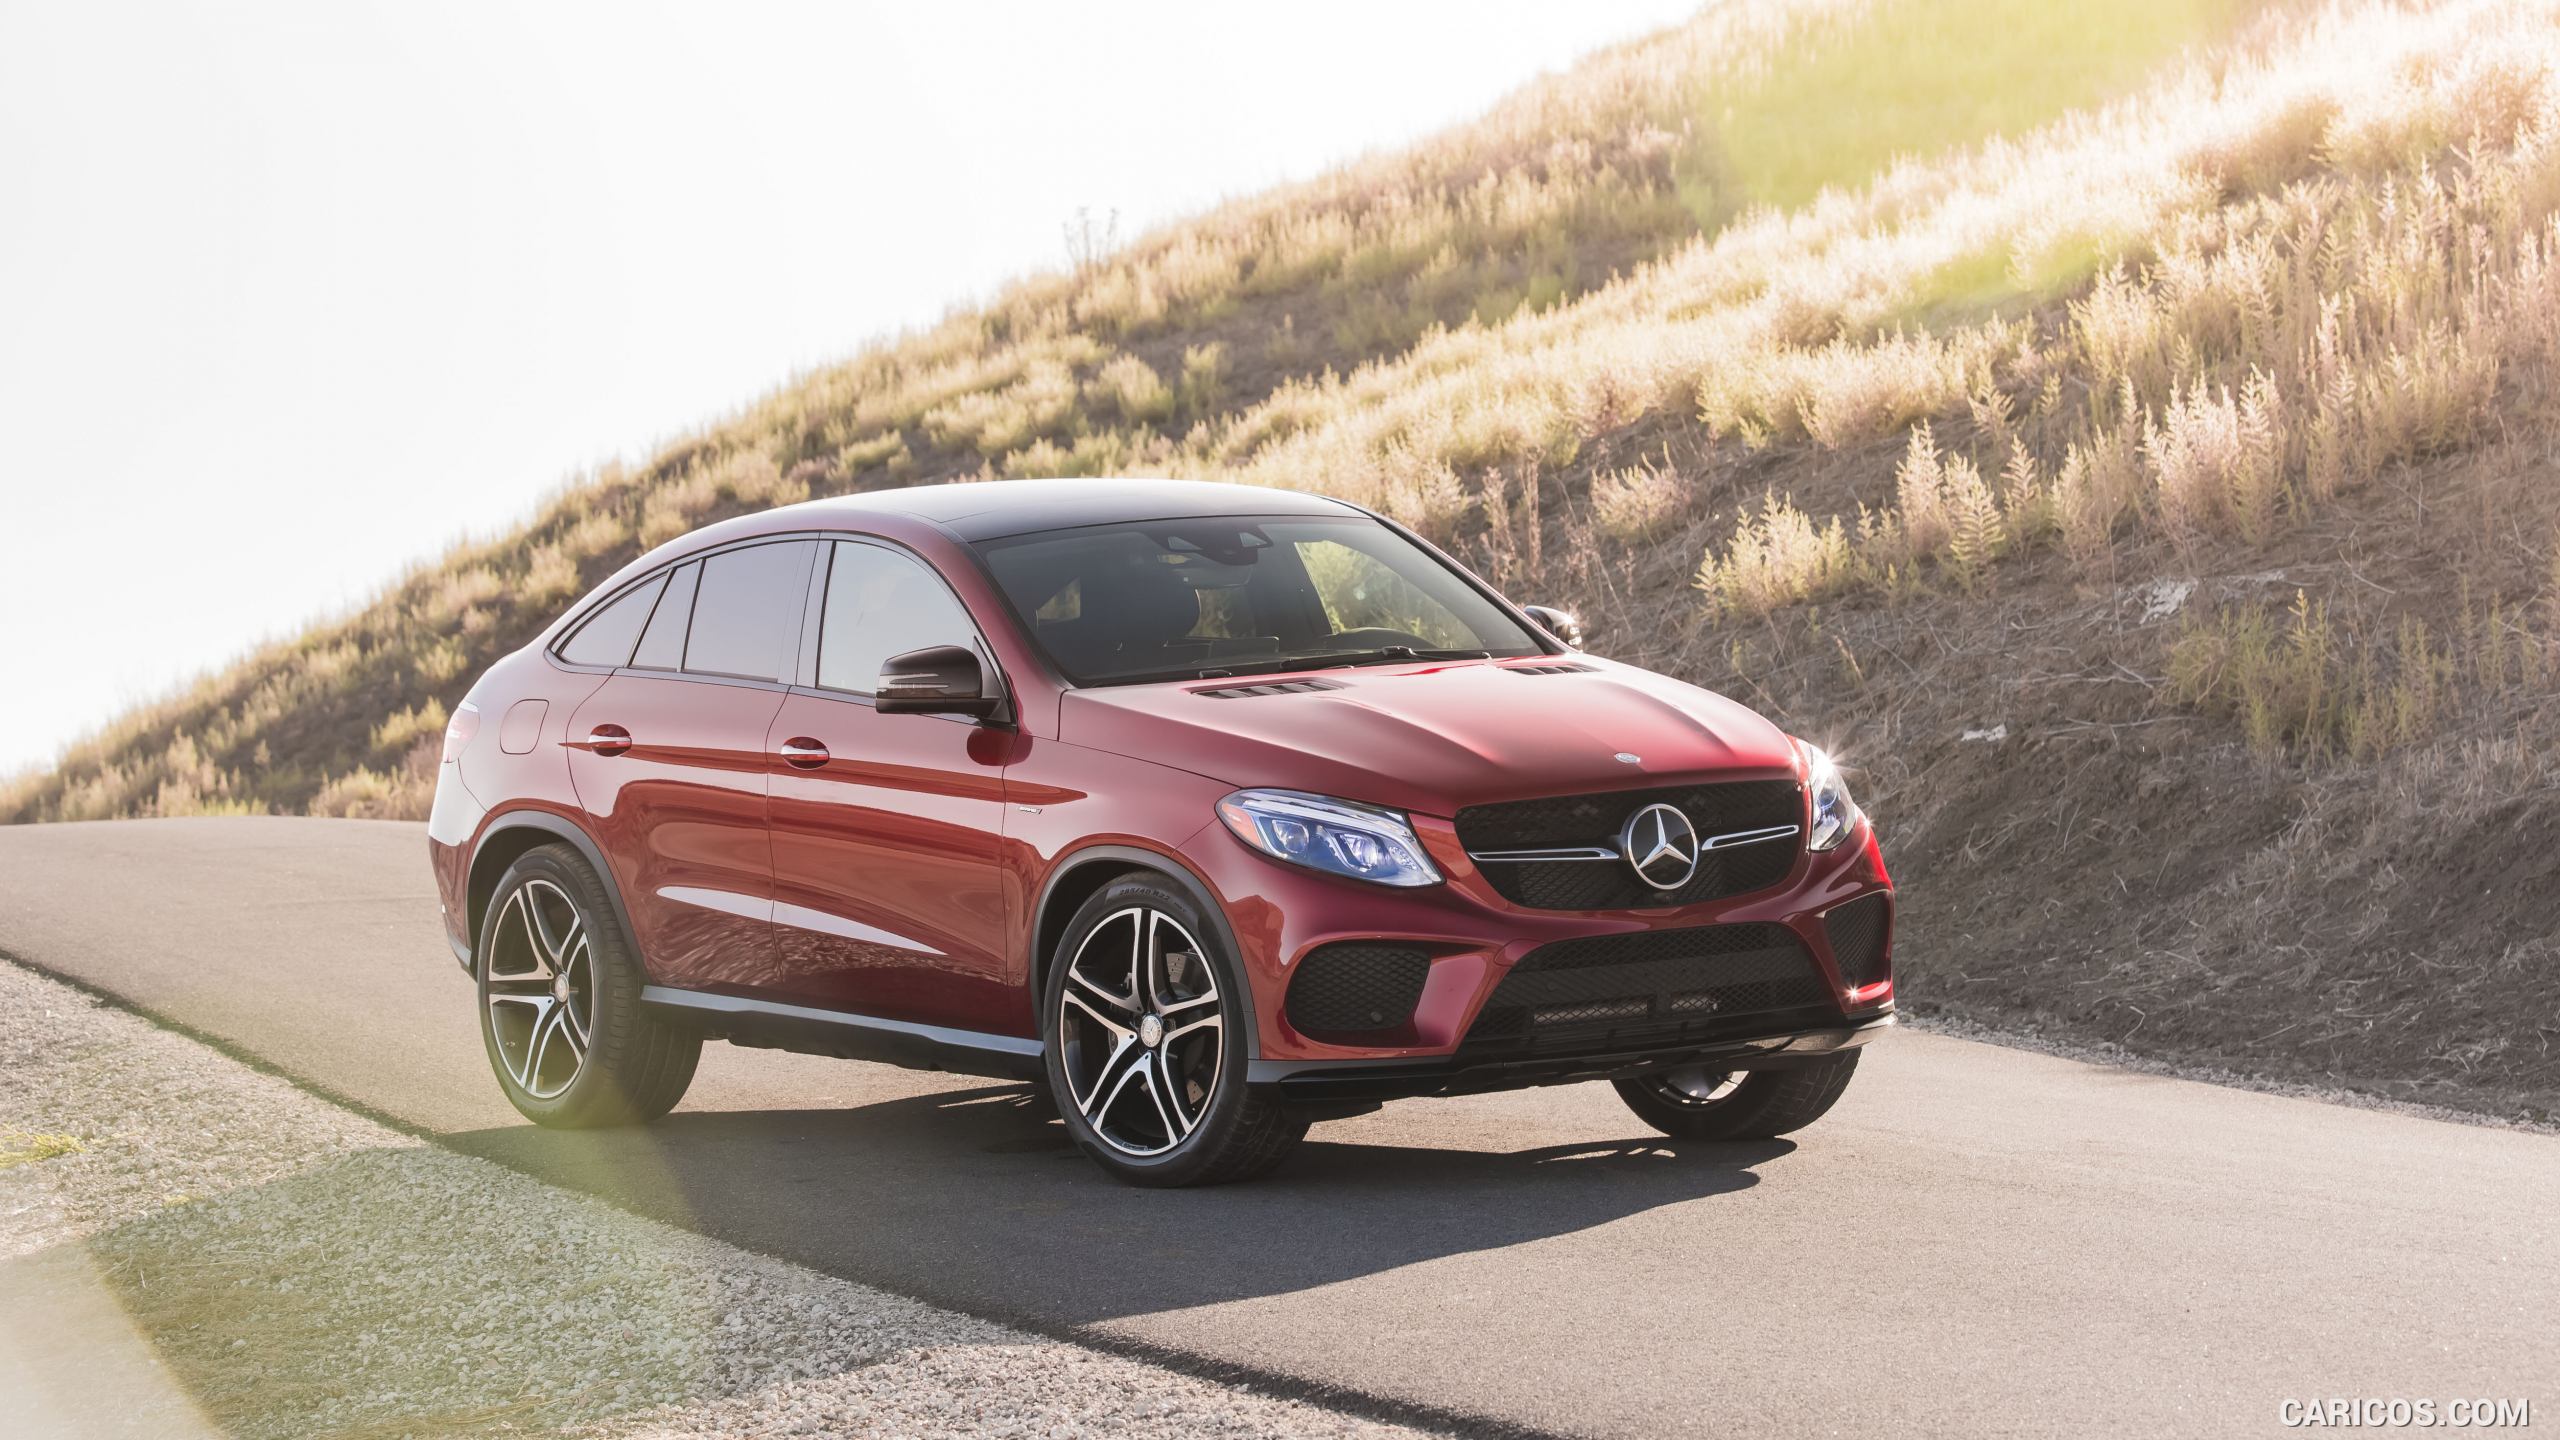 2016 Mercedes-Benz GLE 450 AMG Coupe 4MATIC (US-Spec) - Front, #36 of 115